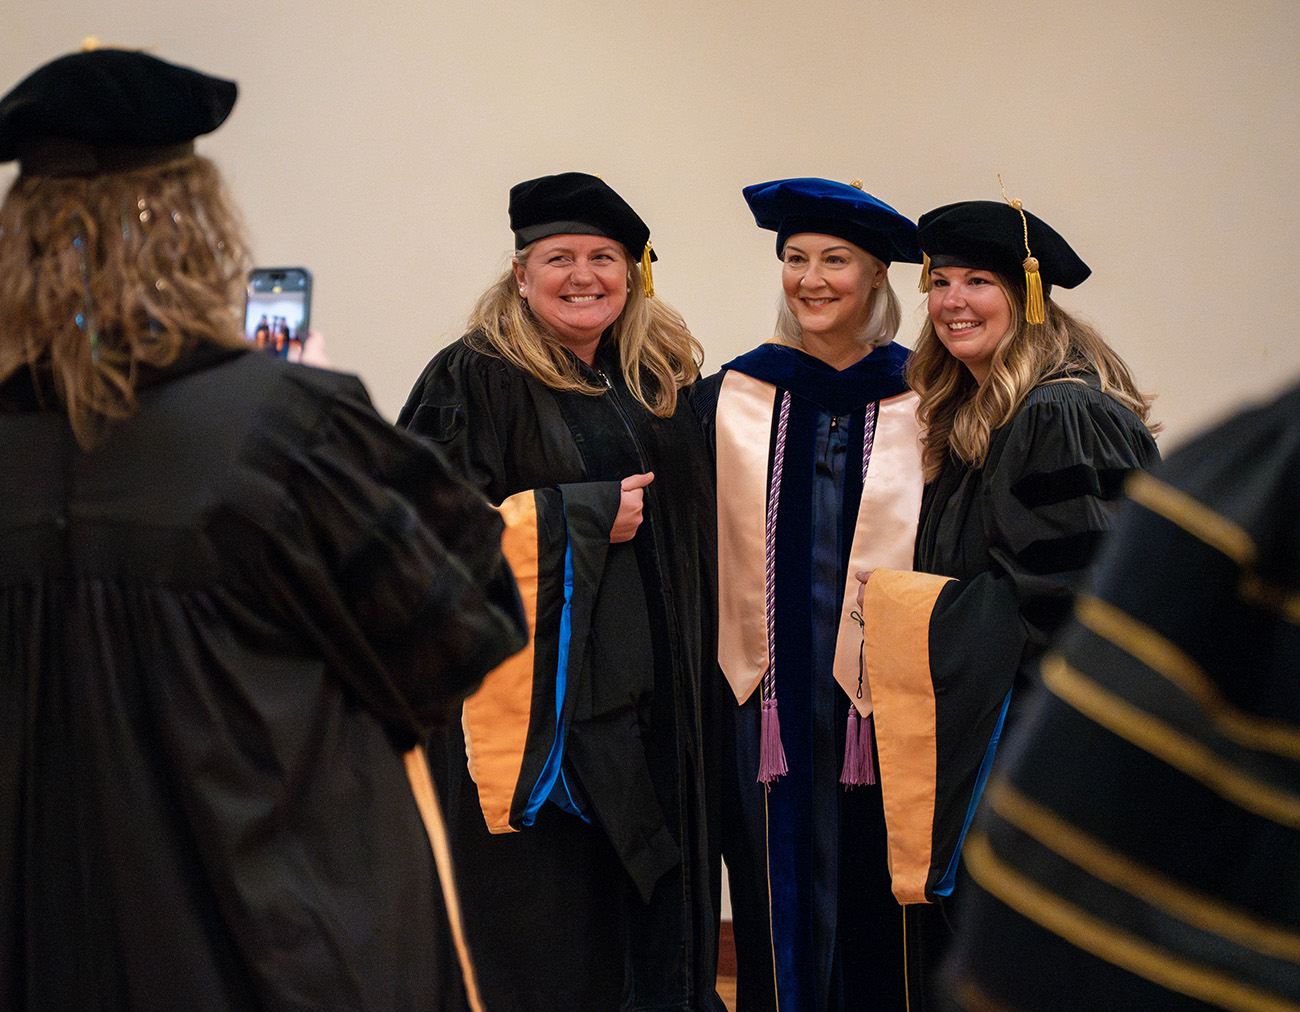 Lauren Kalember poses with a DNP student and professor for a photo in their regalia.